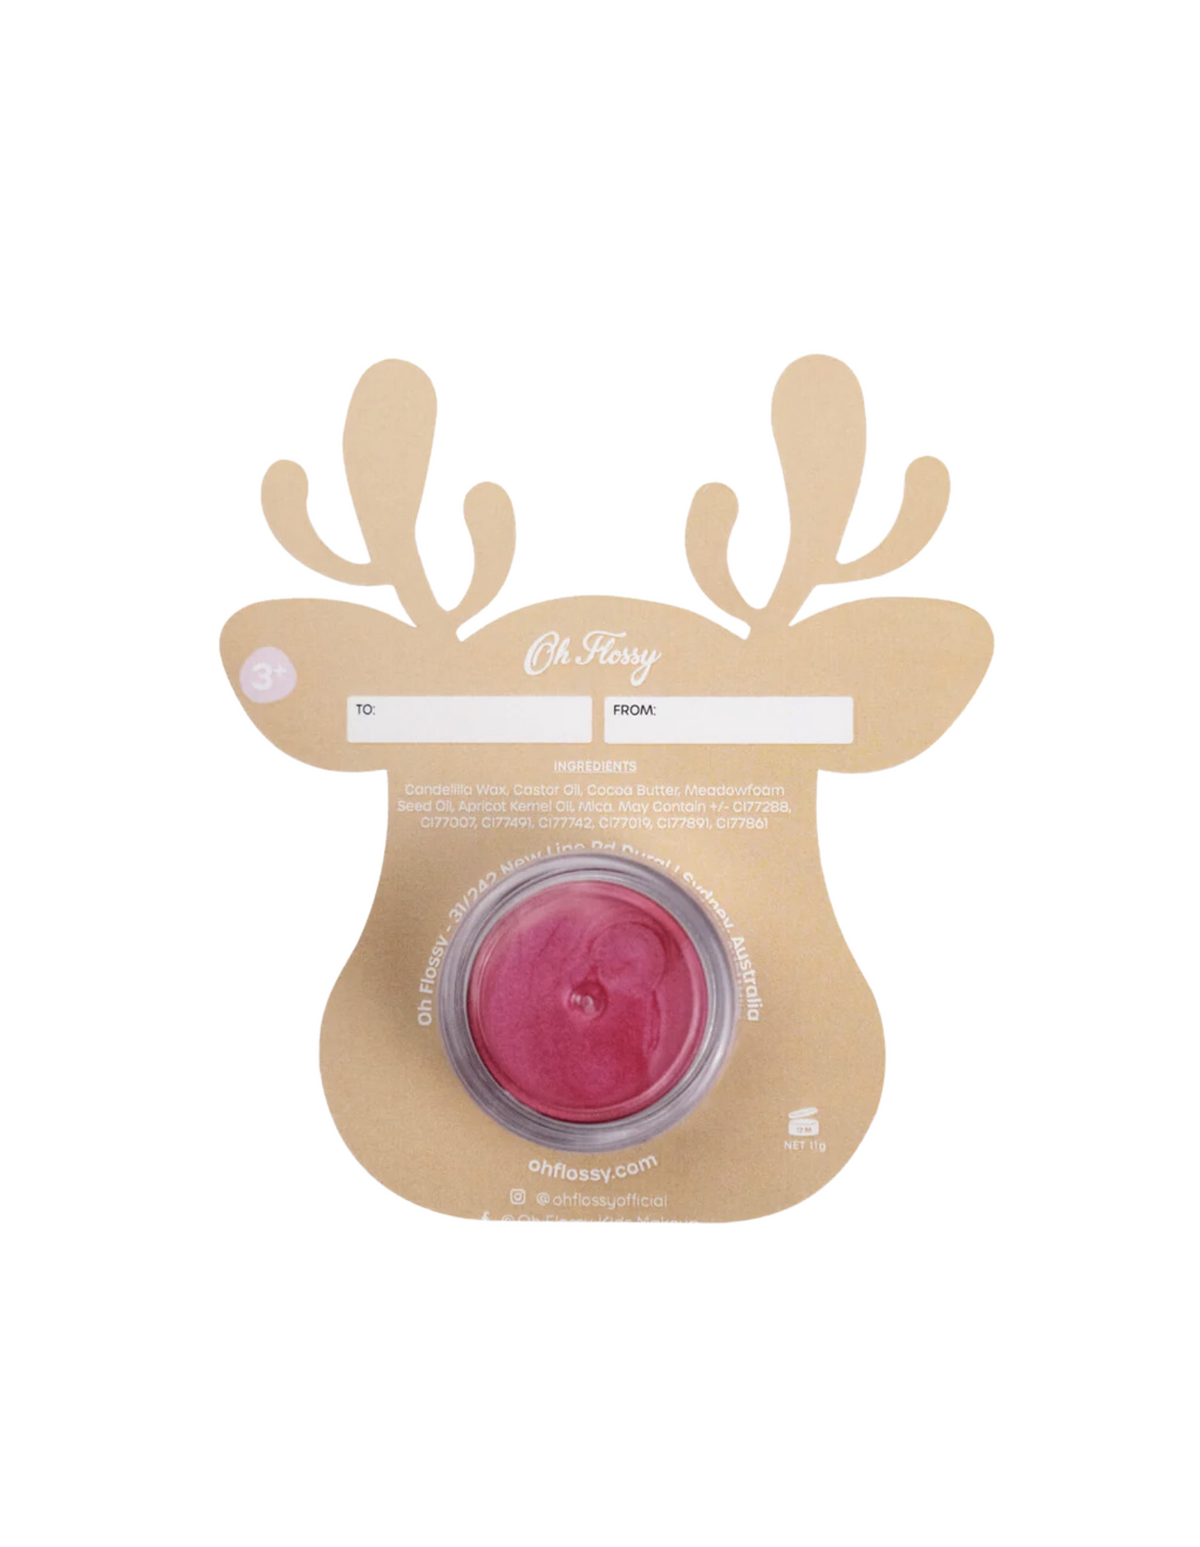 Xmas - Lipstick Rudolph Pink - Oh Flossy